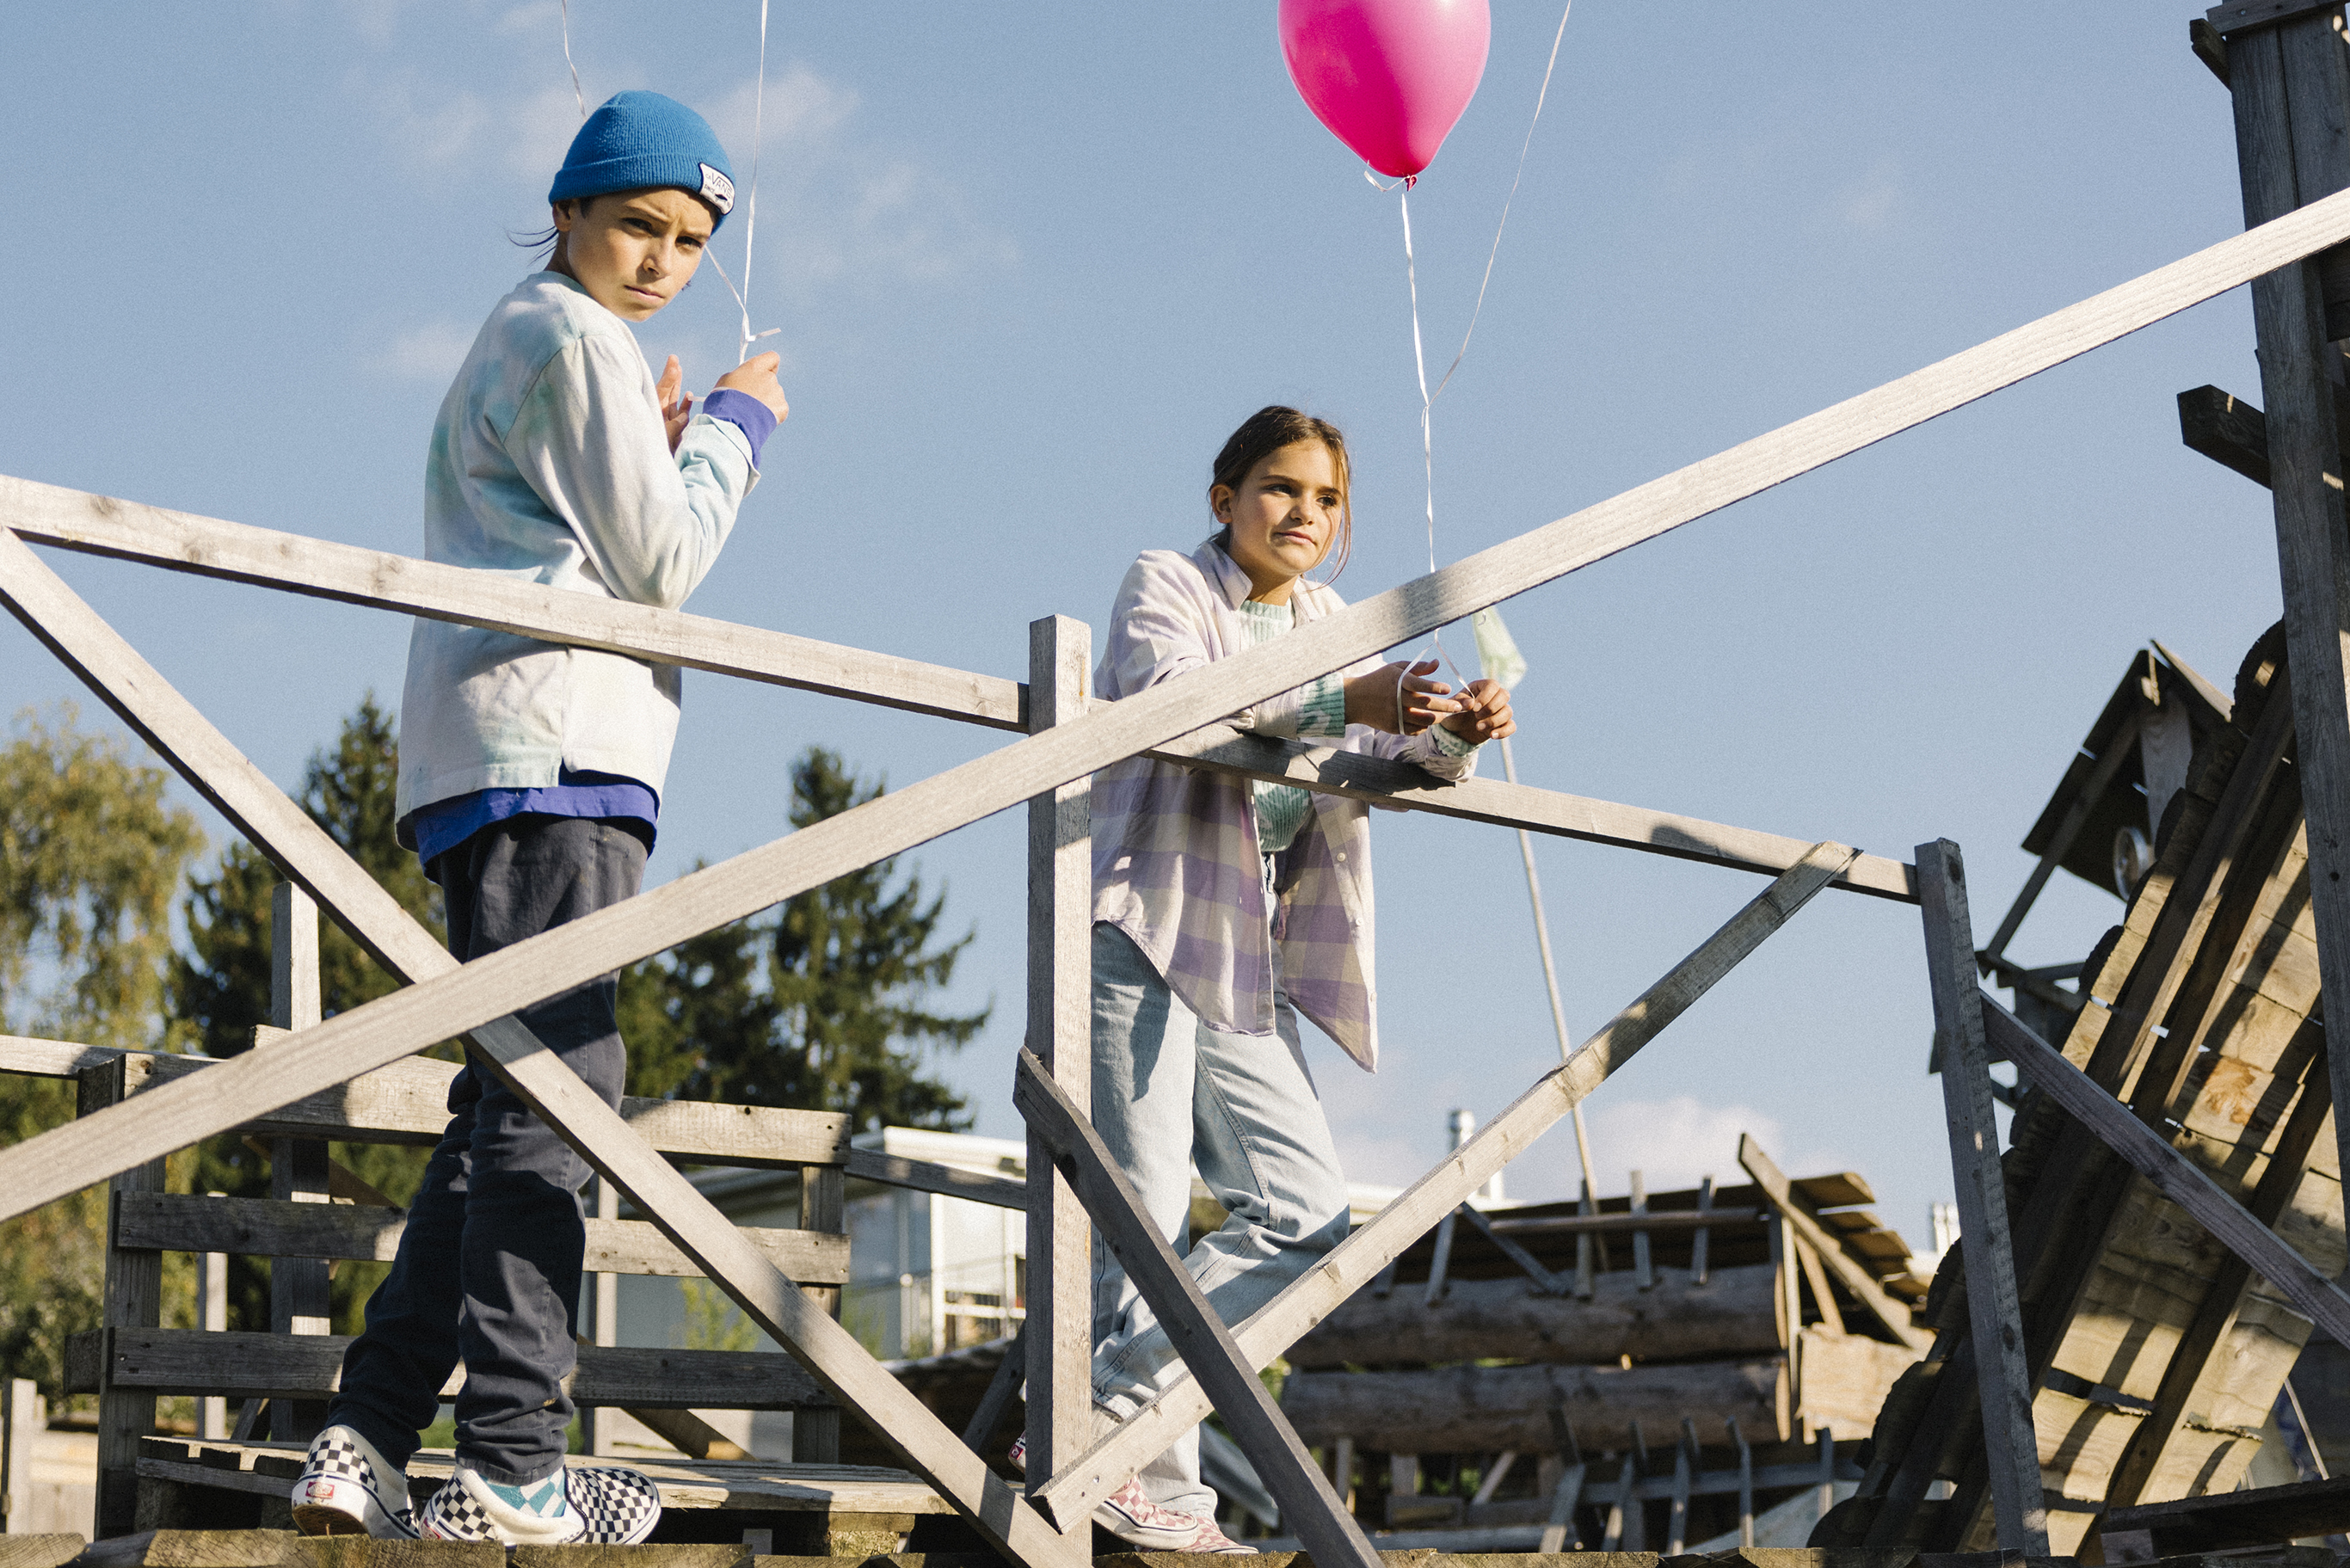 Two young people stand against a railing with concentrated gazes while holding two balloons per person